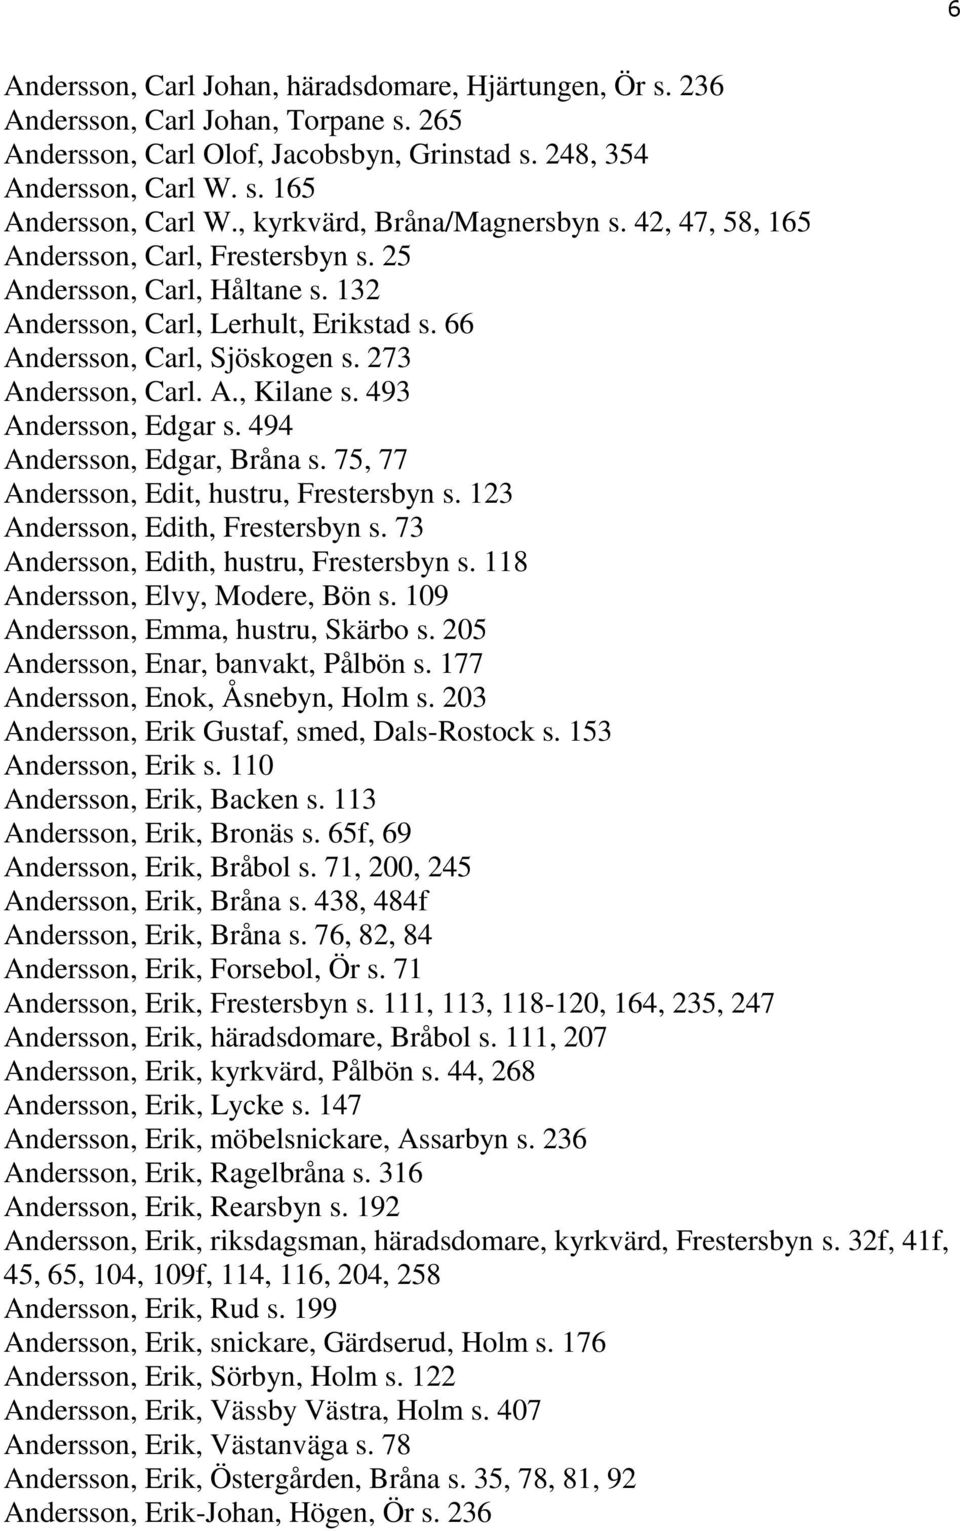 273 Andersson, Carl. A., Kilane s. 493 Andersson, Edgar s. 494 Andersson, Edgar, Bråna s. 75, 77 Andersson, Edit, hustru, Frestersbyn s. 123 Andersson, Edith, Frestersbyn s.